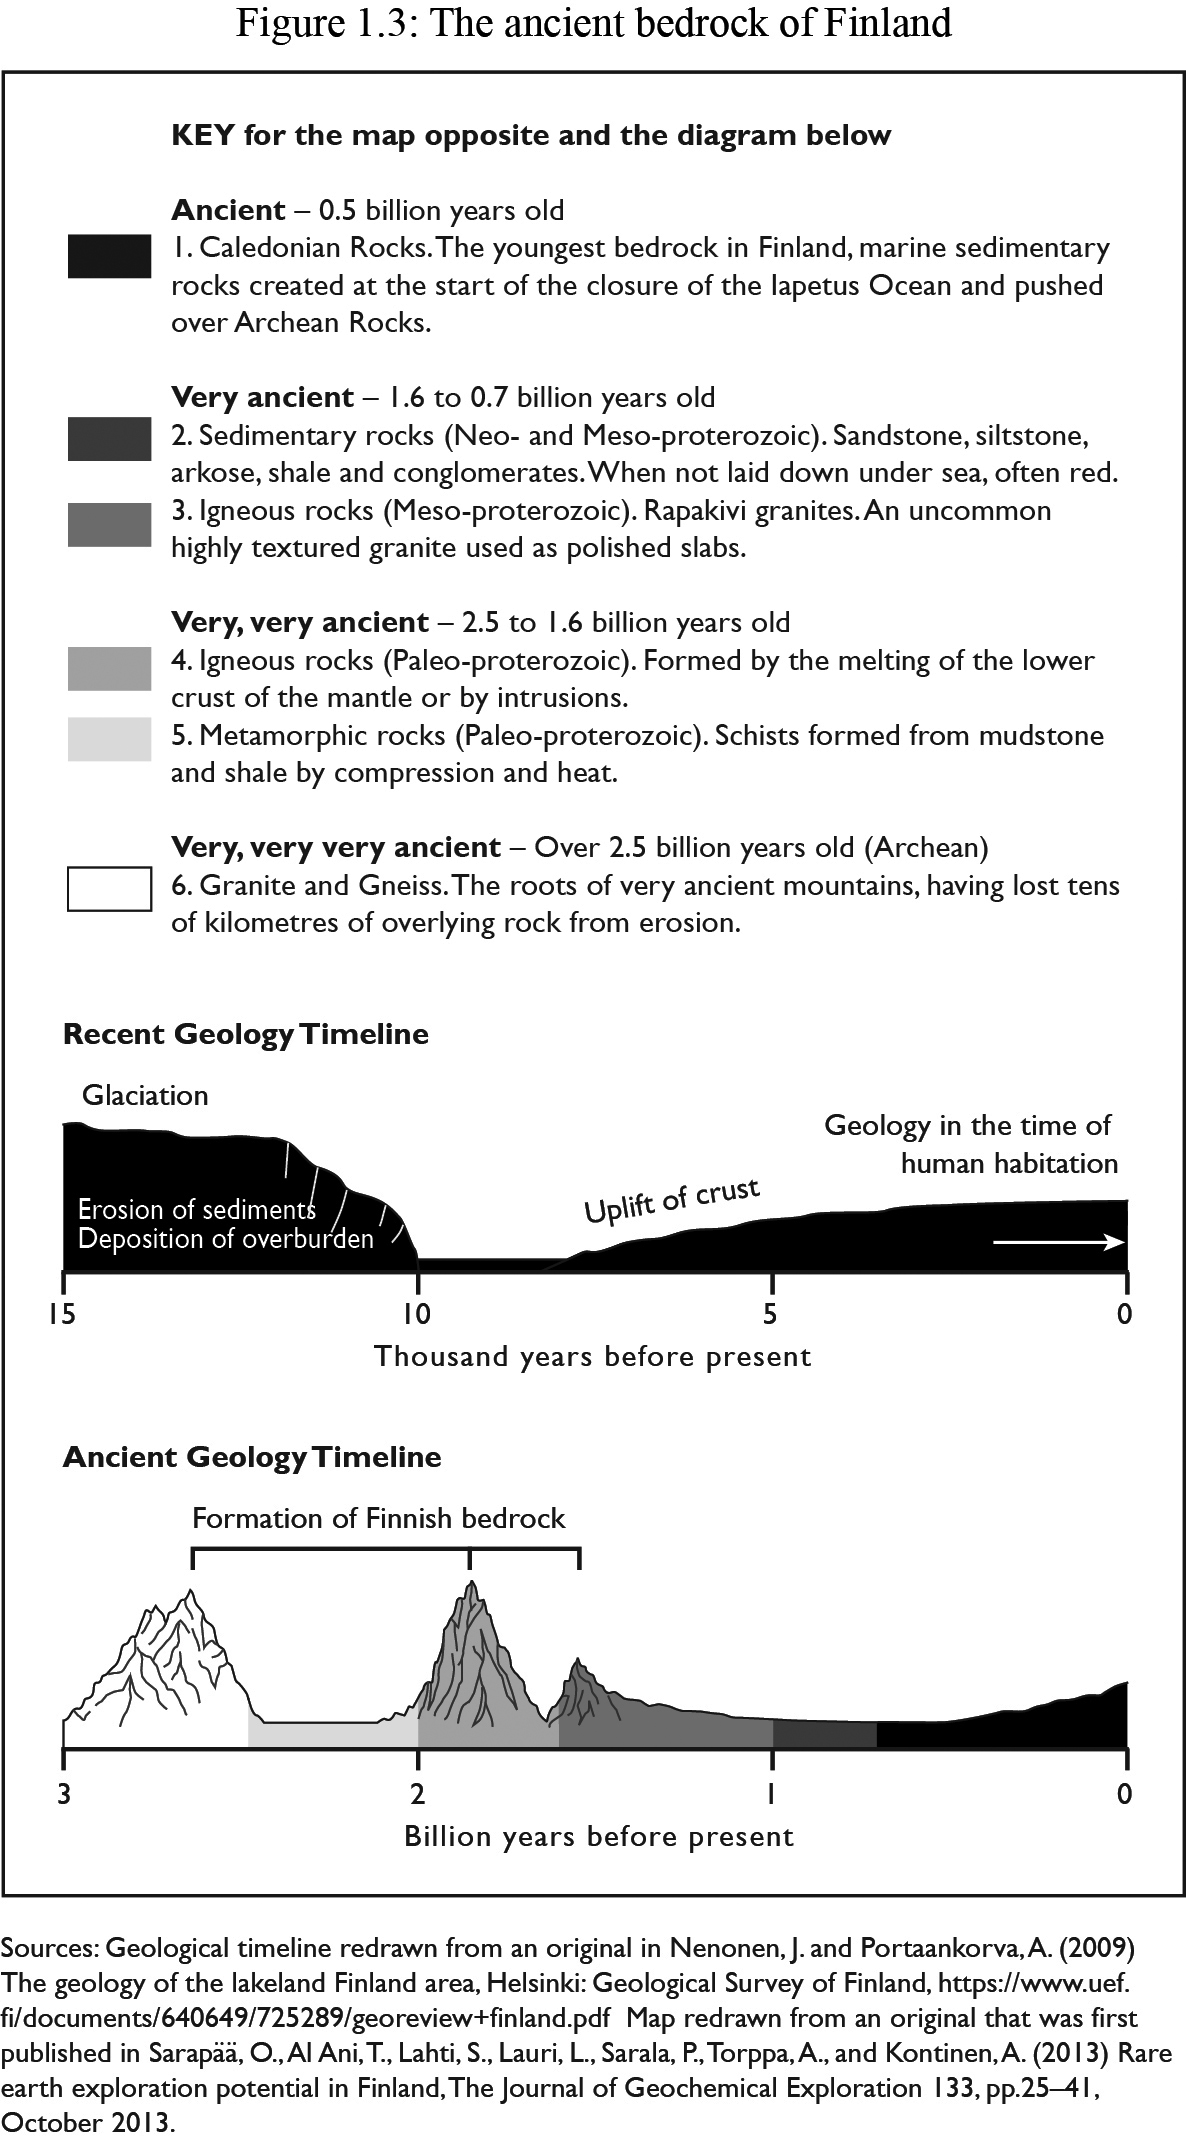 Figure 1.3 (Part I): Sources: Geological timeline redrawn from an original in Nenonen, J. and Portaankorva, A. (2009) The geology of the lakeland Finland area, Helsinki: Geological Survey of Finland, https://www.uef.fi/documents/640649/725289/georeview+finland.pdf Map redrawn from an original that was first published in Sarapää, O., Al Ani, T., Lahti, S., Lauri, L., Sarala, P., Torppa, A., and Kontinen, A. (2013) Rare earth exploration potential in Finland, The Journal of Geochemical Exploration 133, pp.25–41, October 2013.